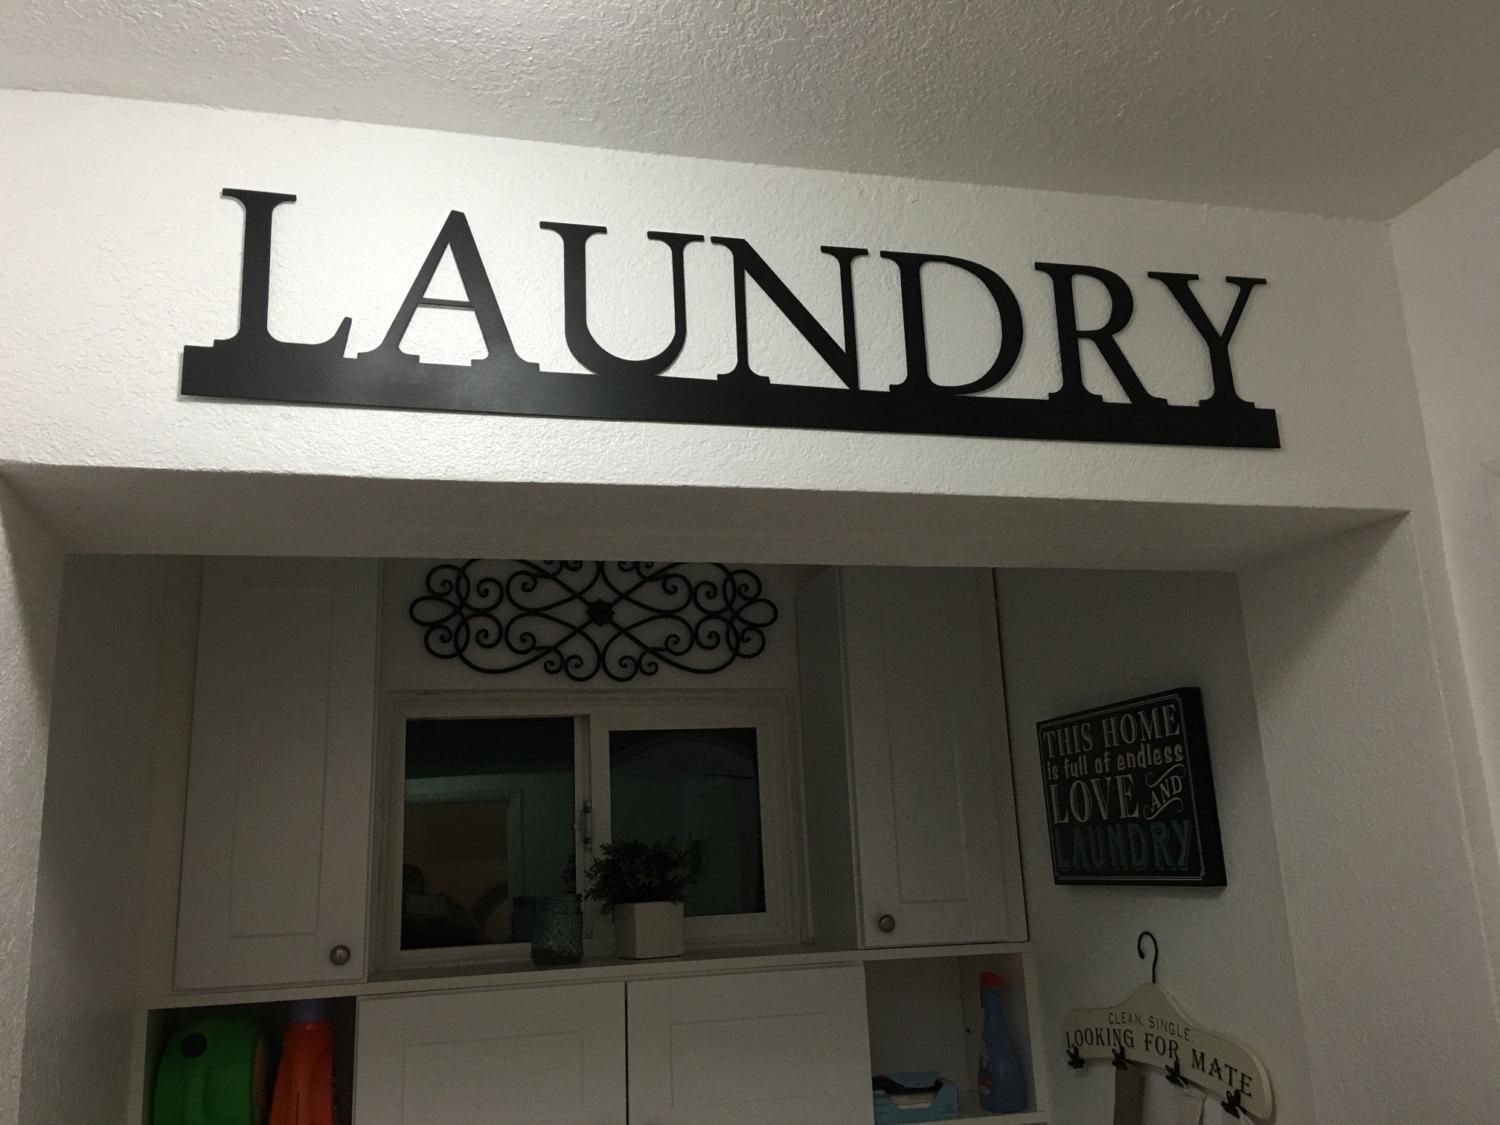 Laundry Sign – Metal Laundry – Home Decor – Laundry Room Decor With Regard To Laundry Room Wall Art (View 15 of 20)